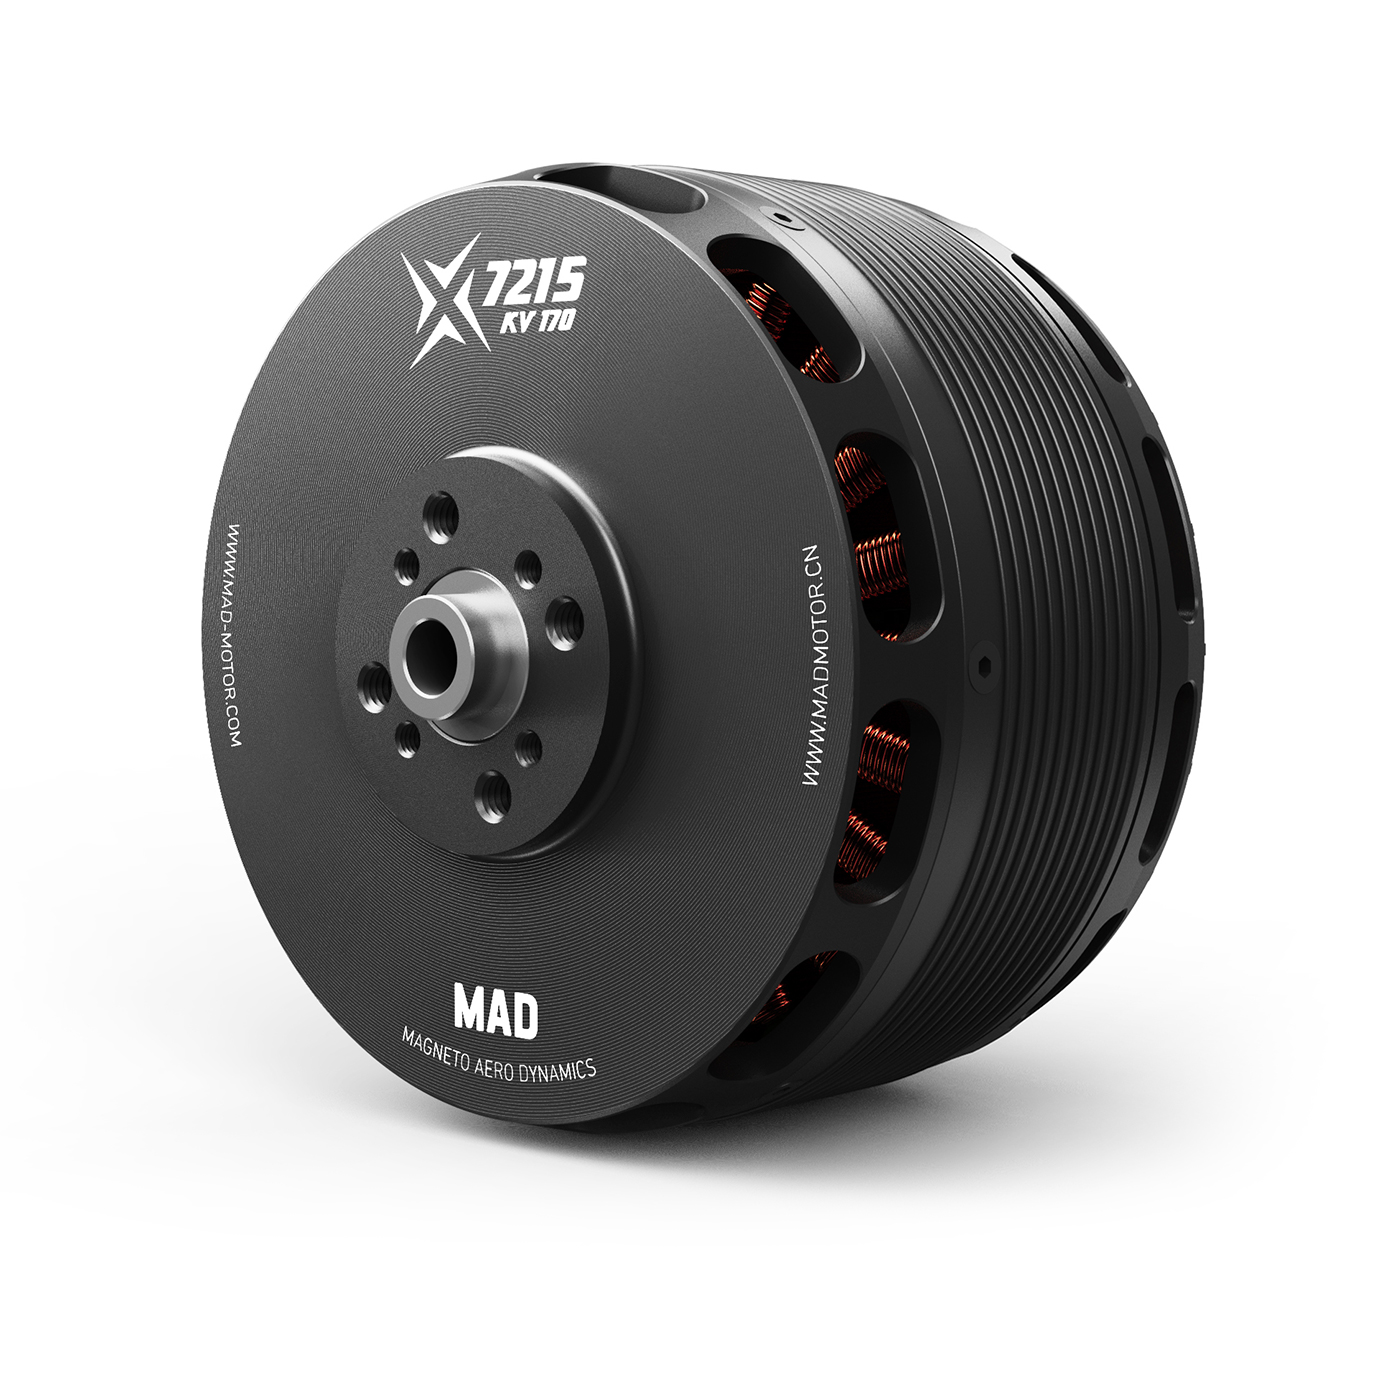 MAD X7215  brushless motor suitable for 120E-170E aircraft,corresponding to gasoline engine about 30-40CC